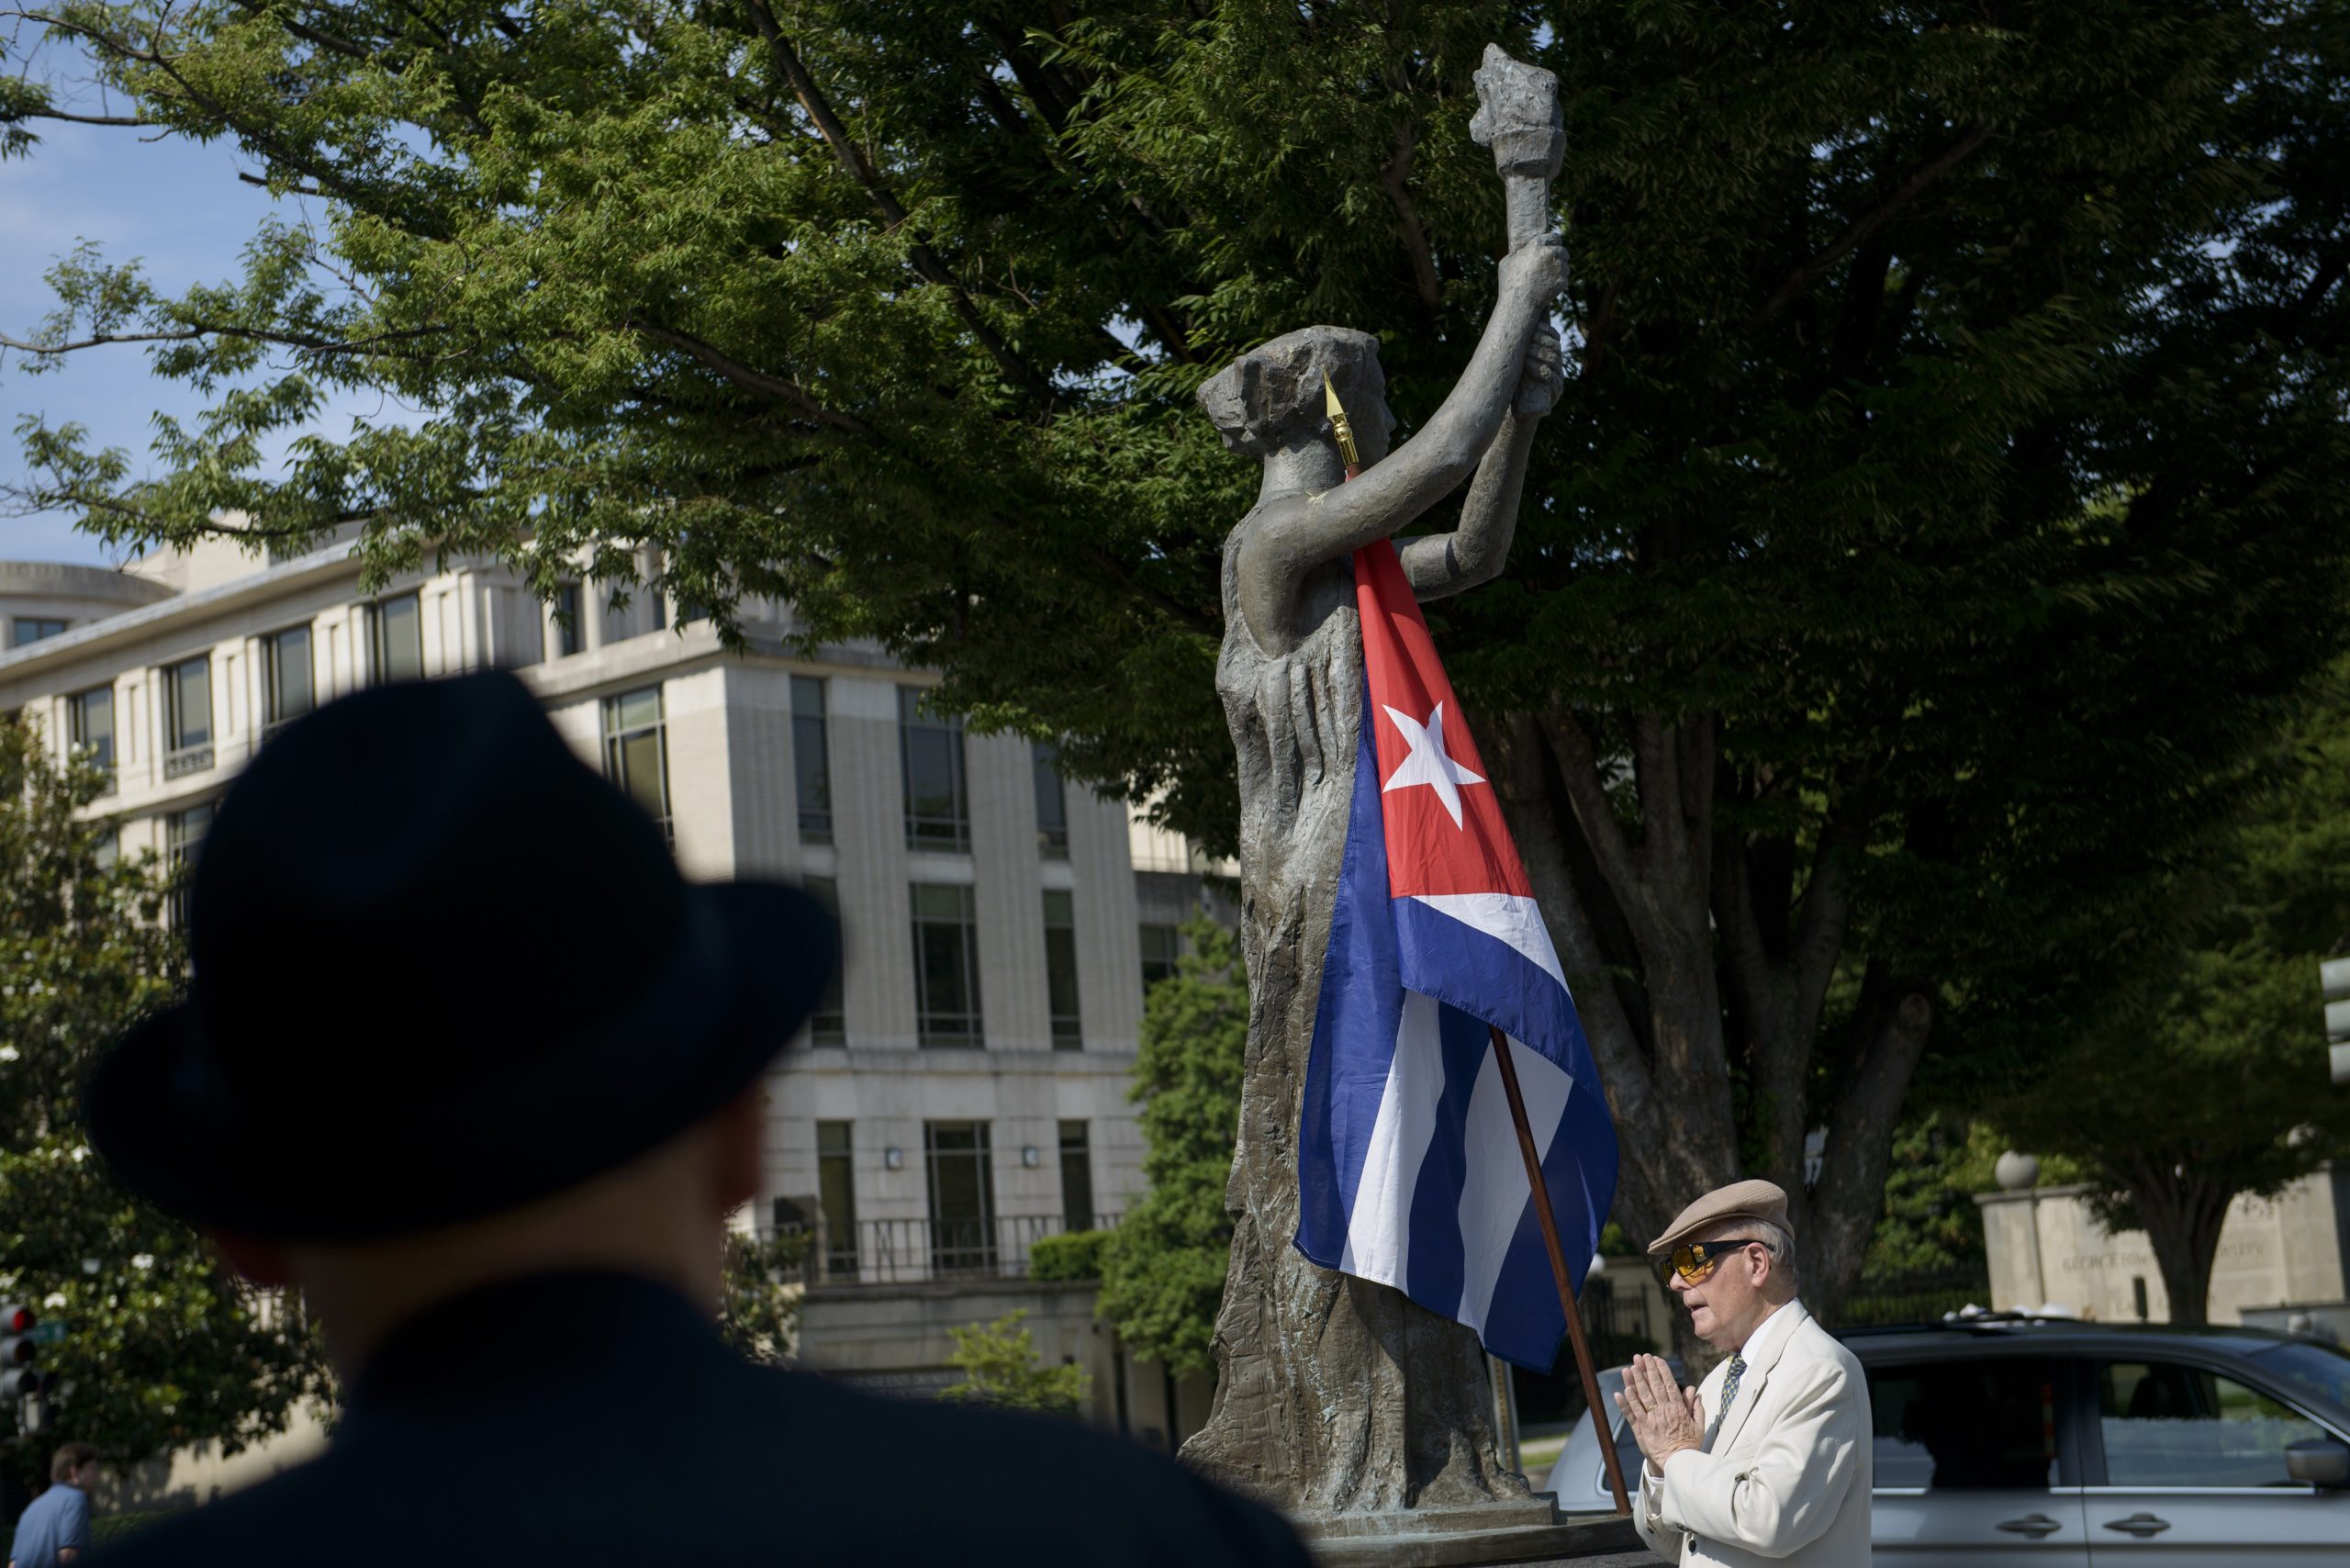 The Cuban flag is seen as people arrive for an event at the Victims of Communism Memorial June 12, 2015 in Washington, DC. AFP PHOTO/BRENDAN SMIALOWSKI (Photo credit should read BRENDAN SMIALOWSKI/AFP via Getty Images)